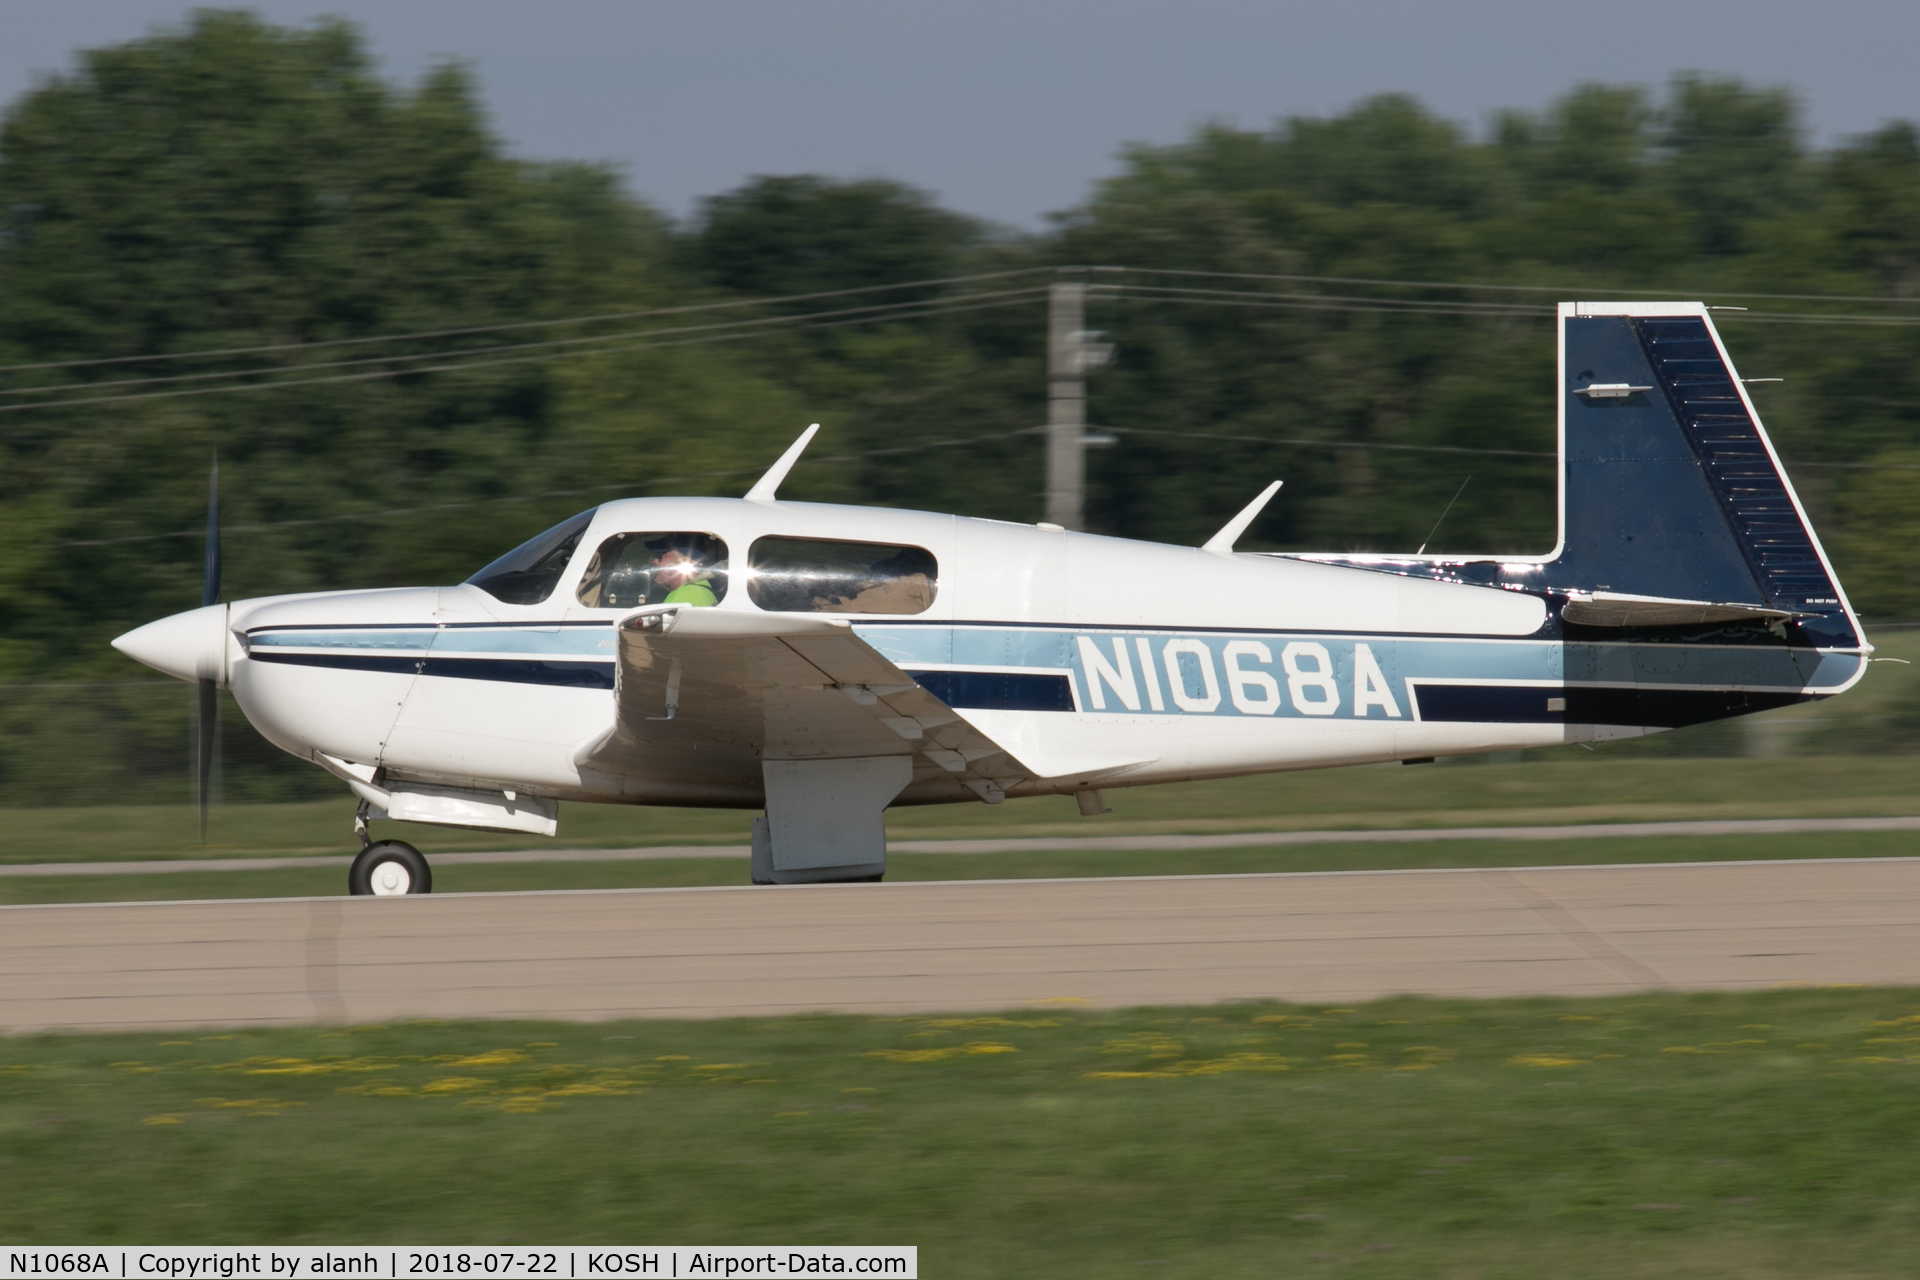 N1068A, 1989 Mooney M20J 201 C/N 24-3133, Arriving at AirVenture 2018 (in company with 60 other Mooneys)